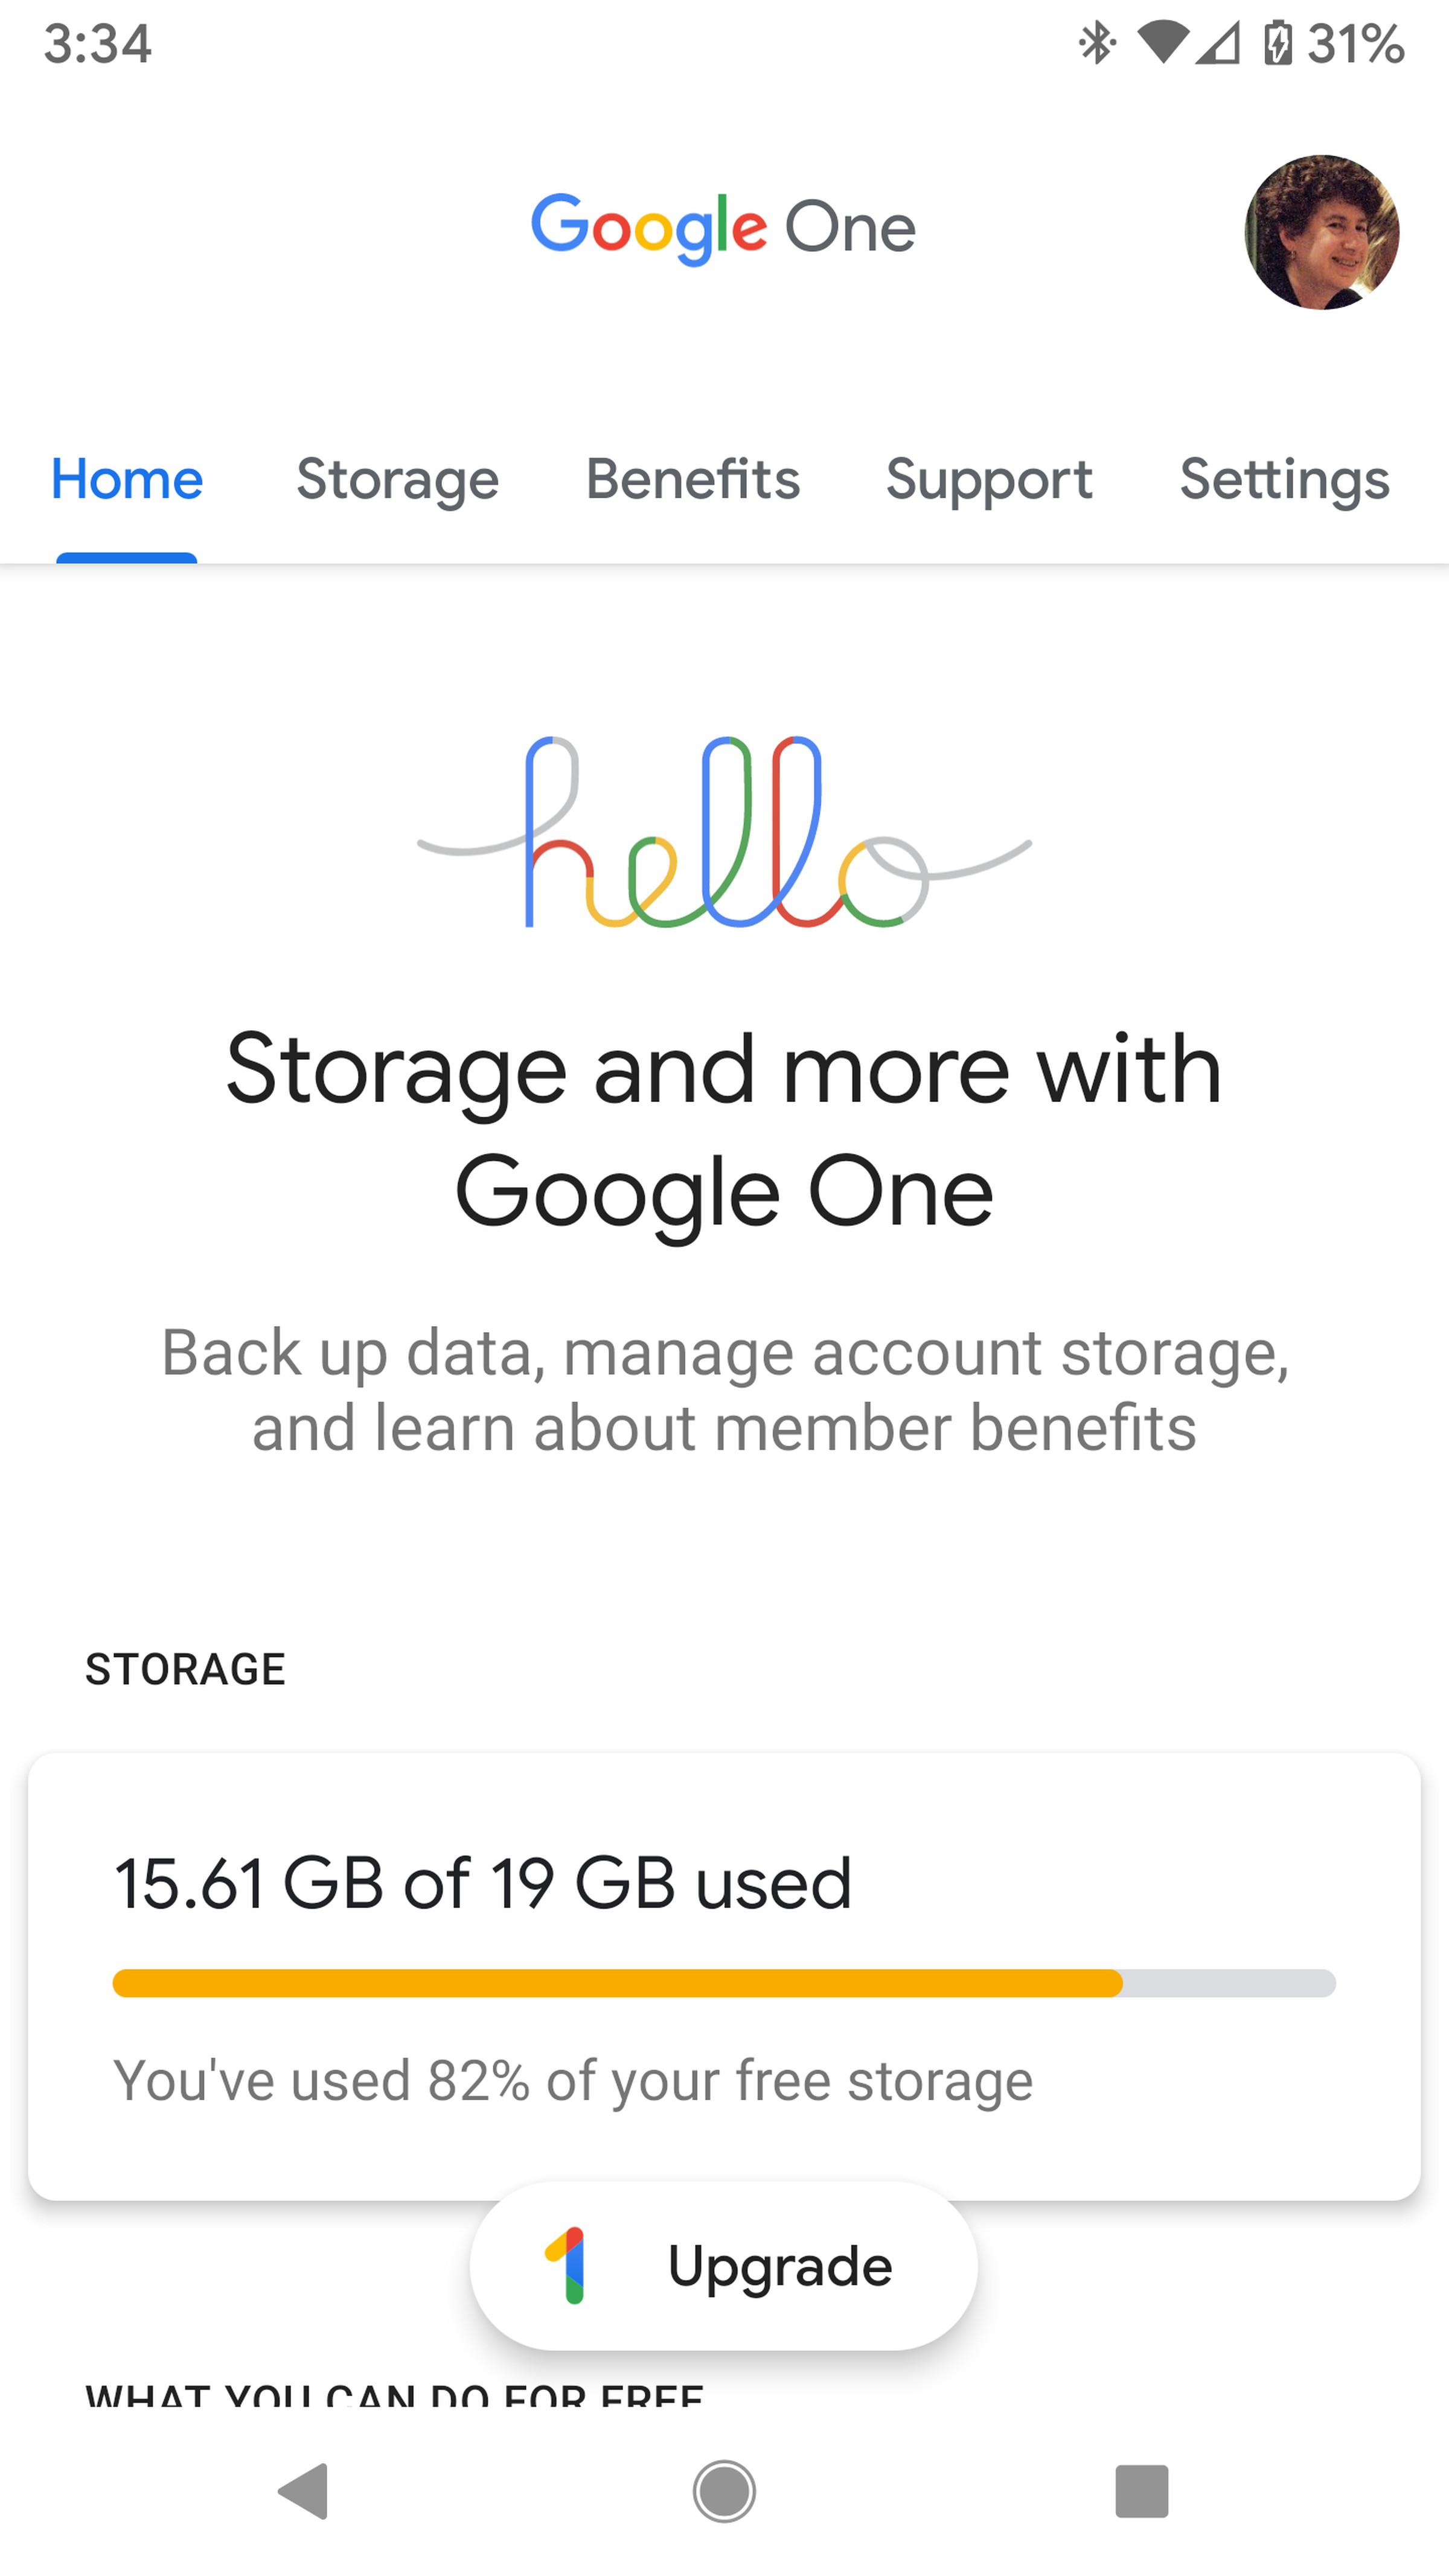 You can now use Google One for free storage up to 15GB.